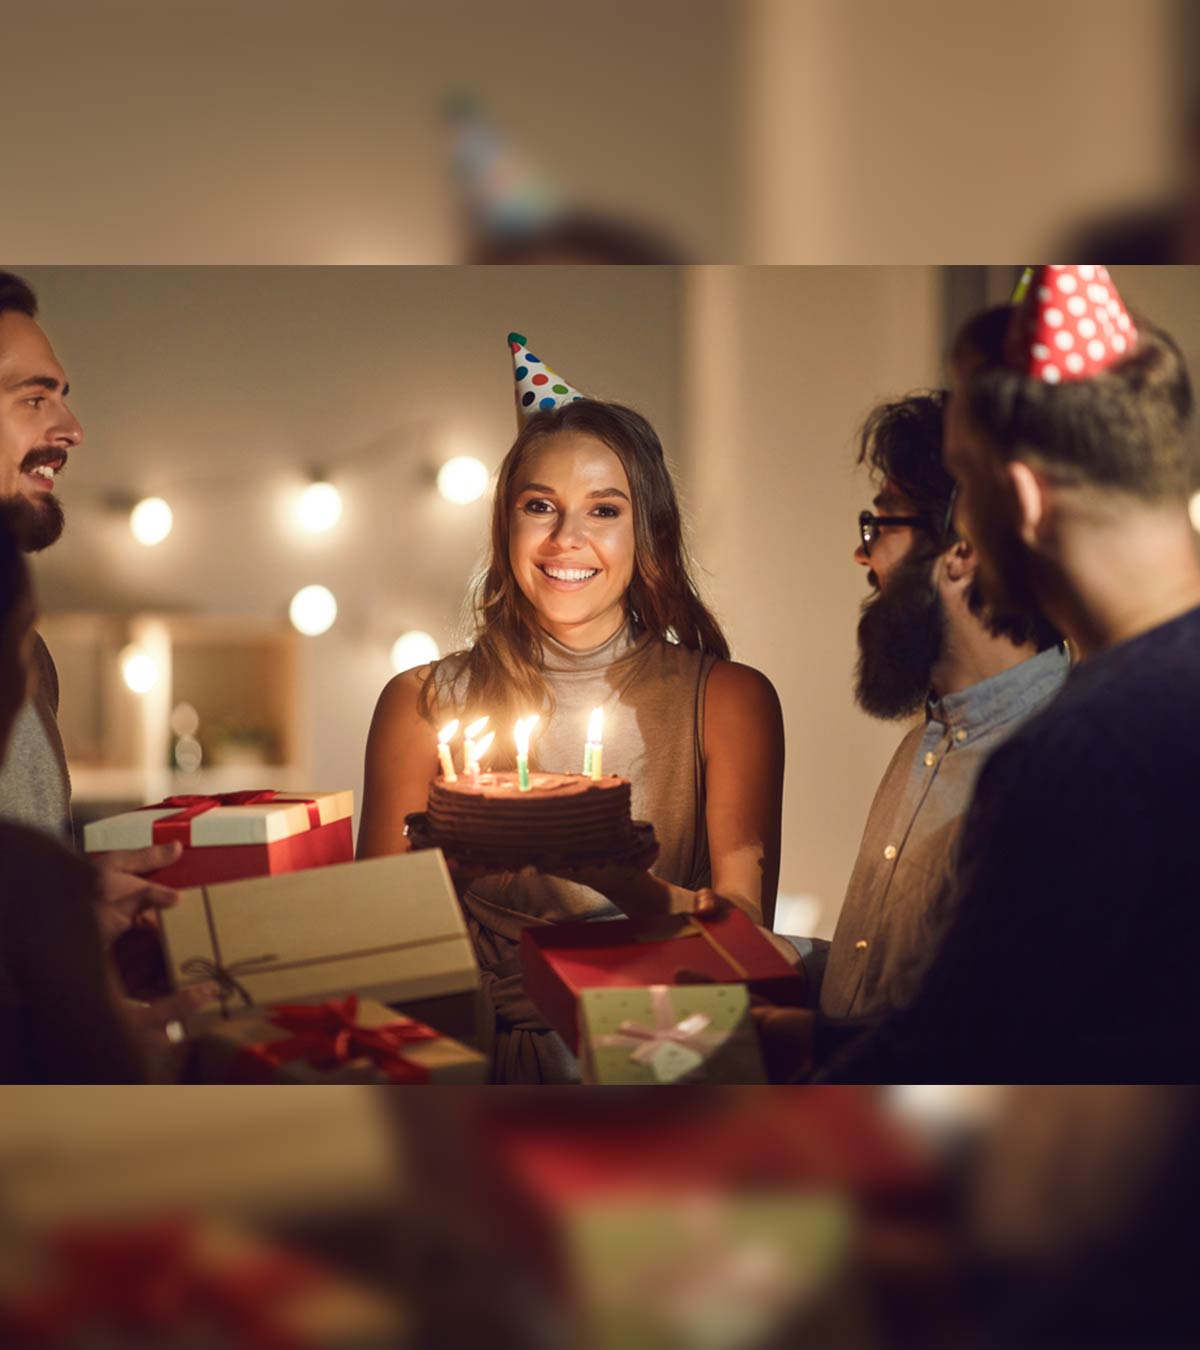 19+ Birthday Poems For Friends And Best Friend